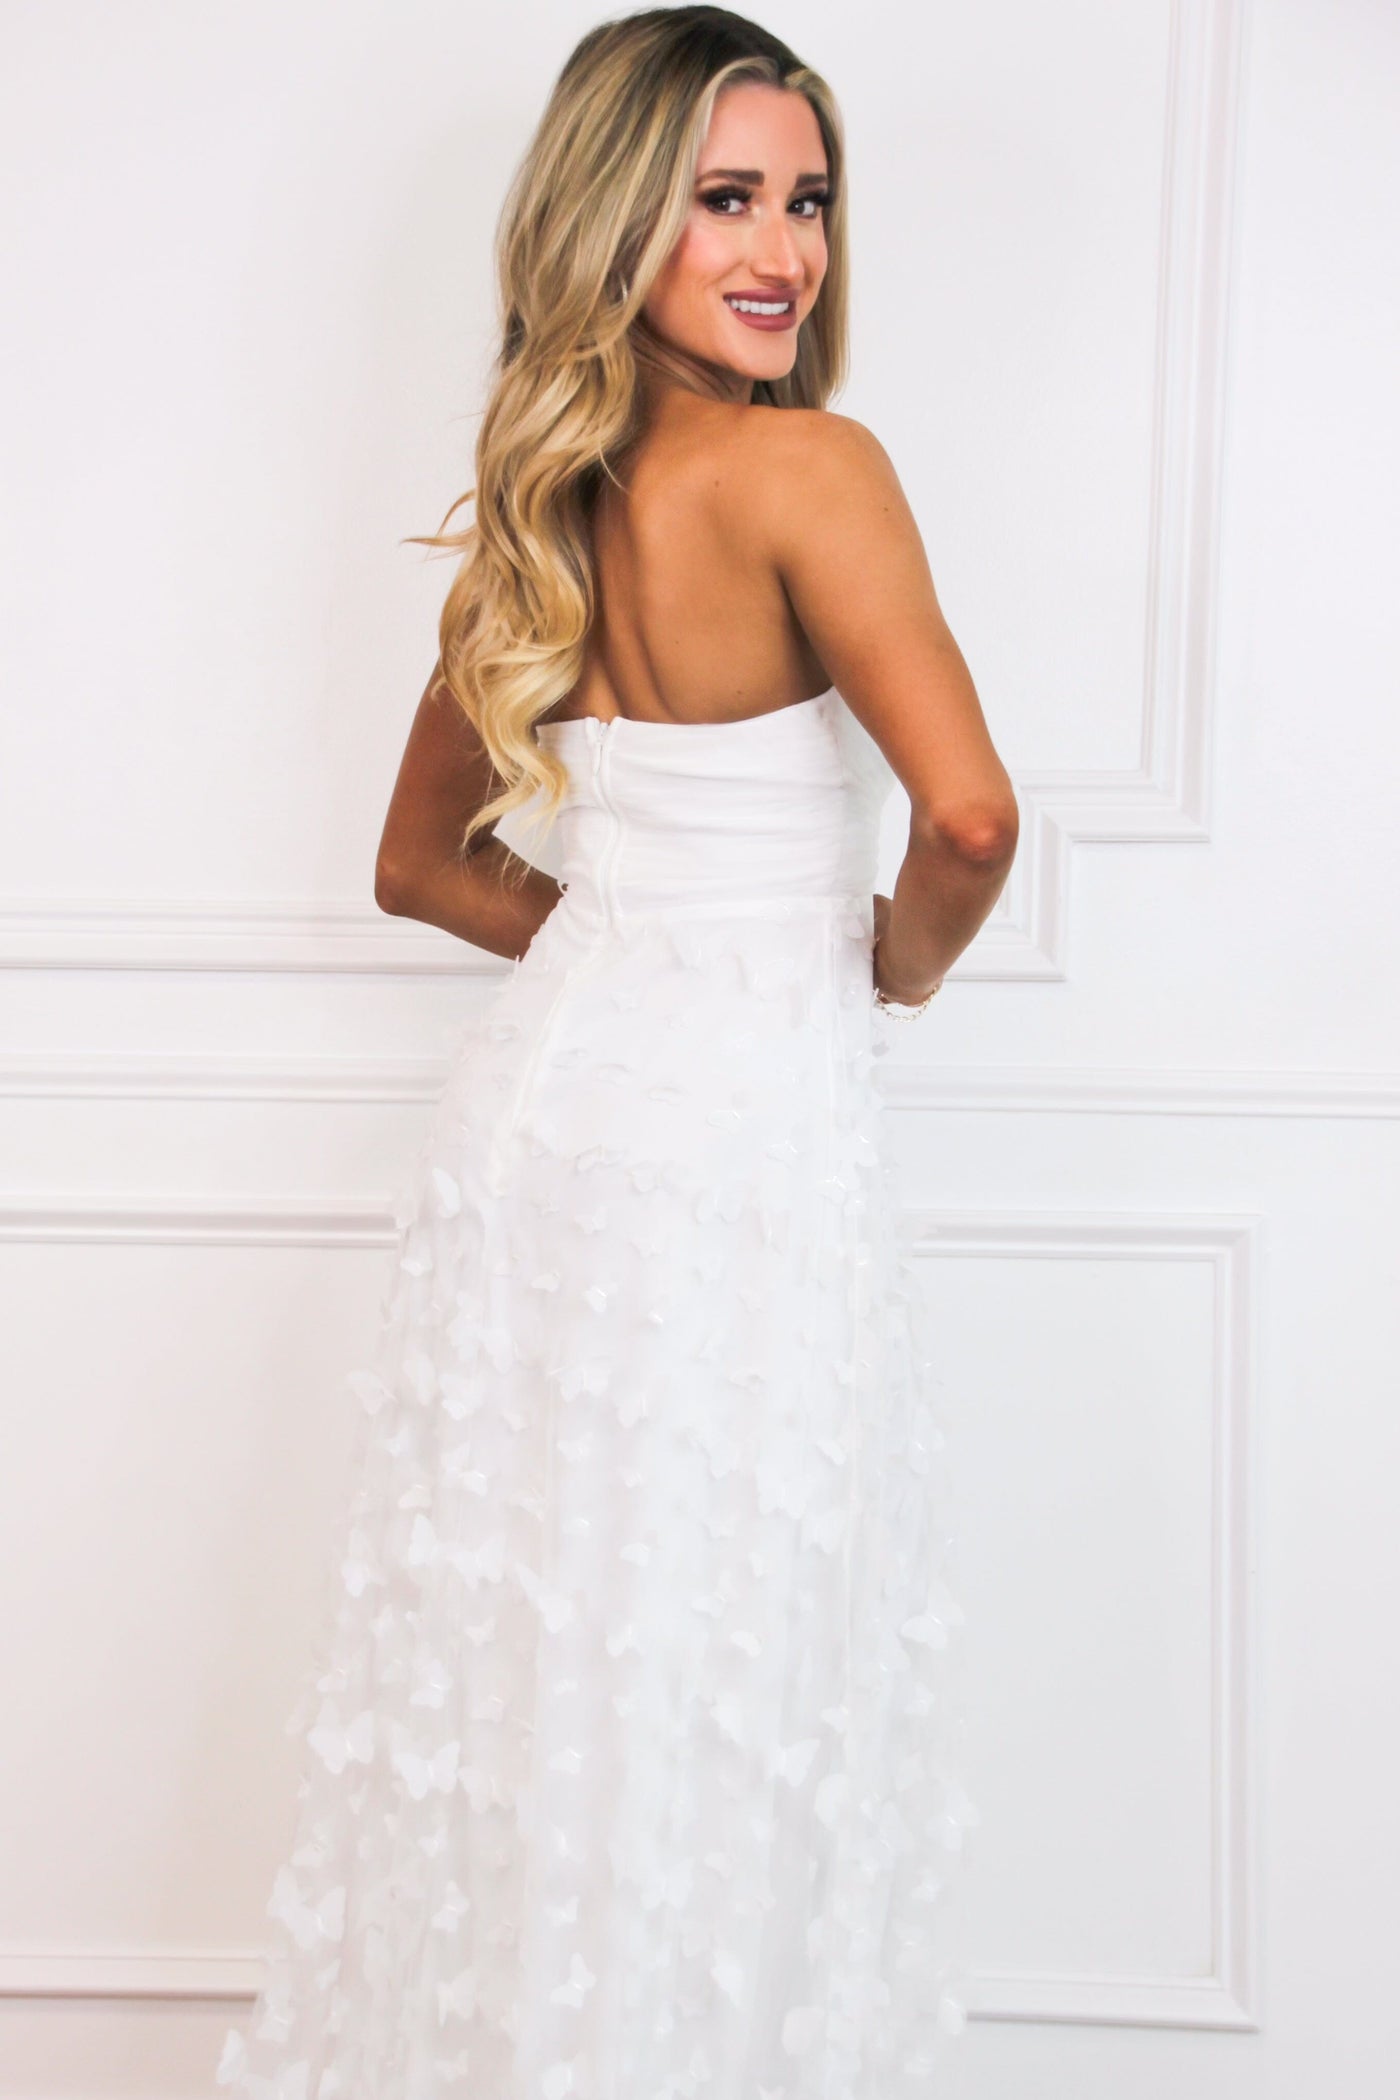 Butterfly Kisses Strapless Applique Maxi Dress: White - Bella and Bloom Boutique